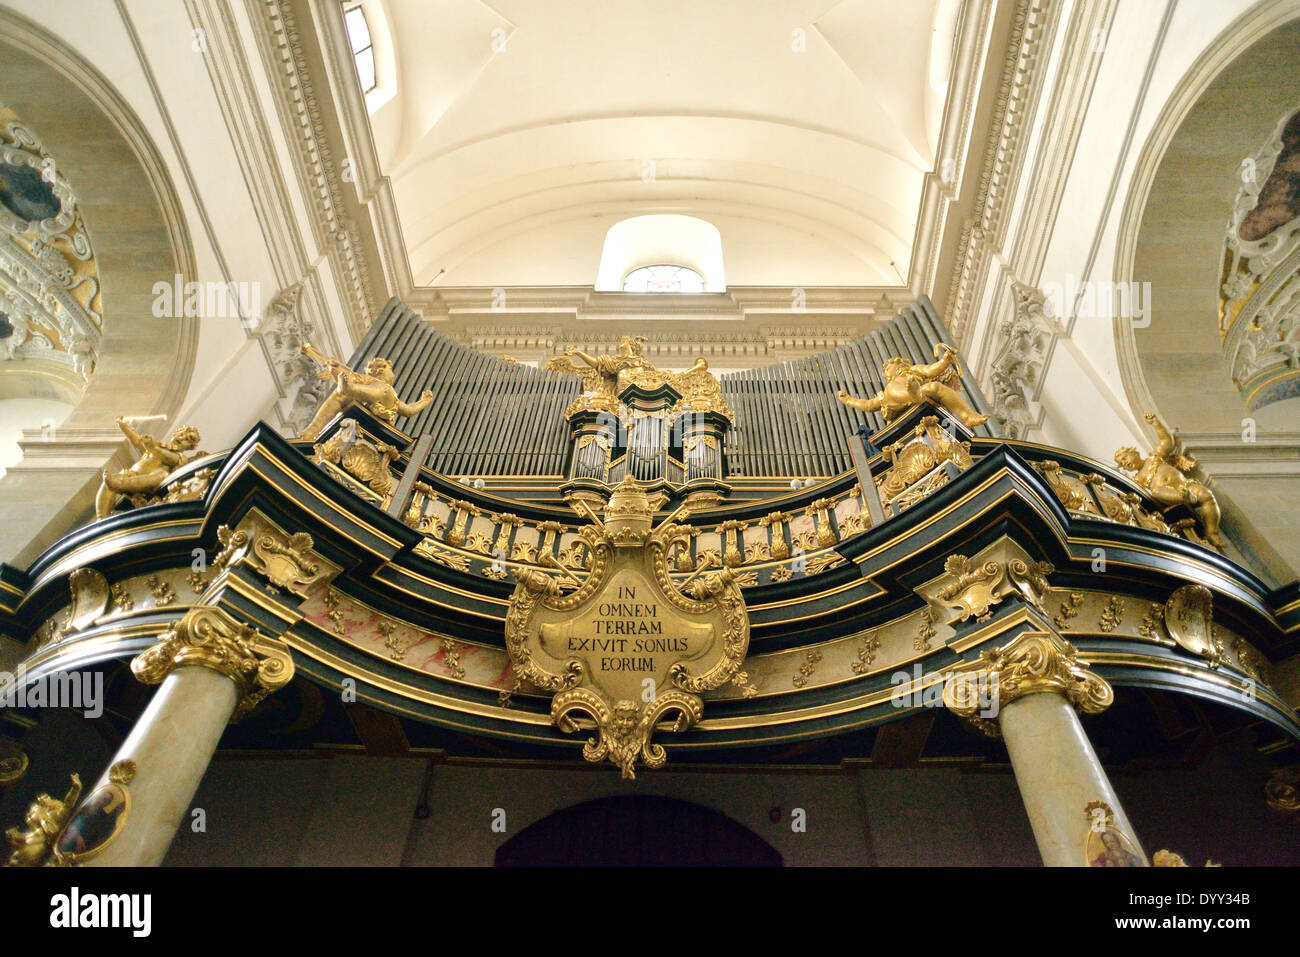 Pipe organ in Saints Peter and Paul Church (in the Old Town district of Krakow). Stock Photo